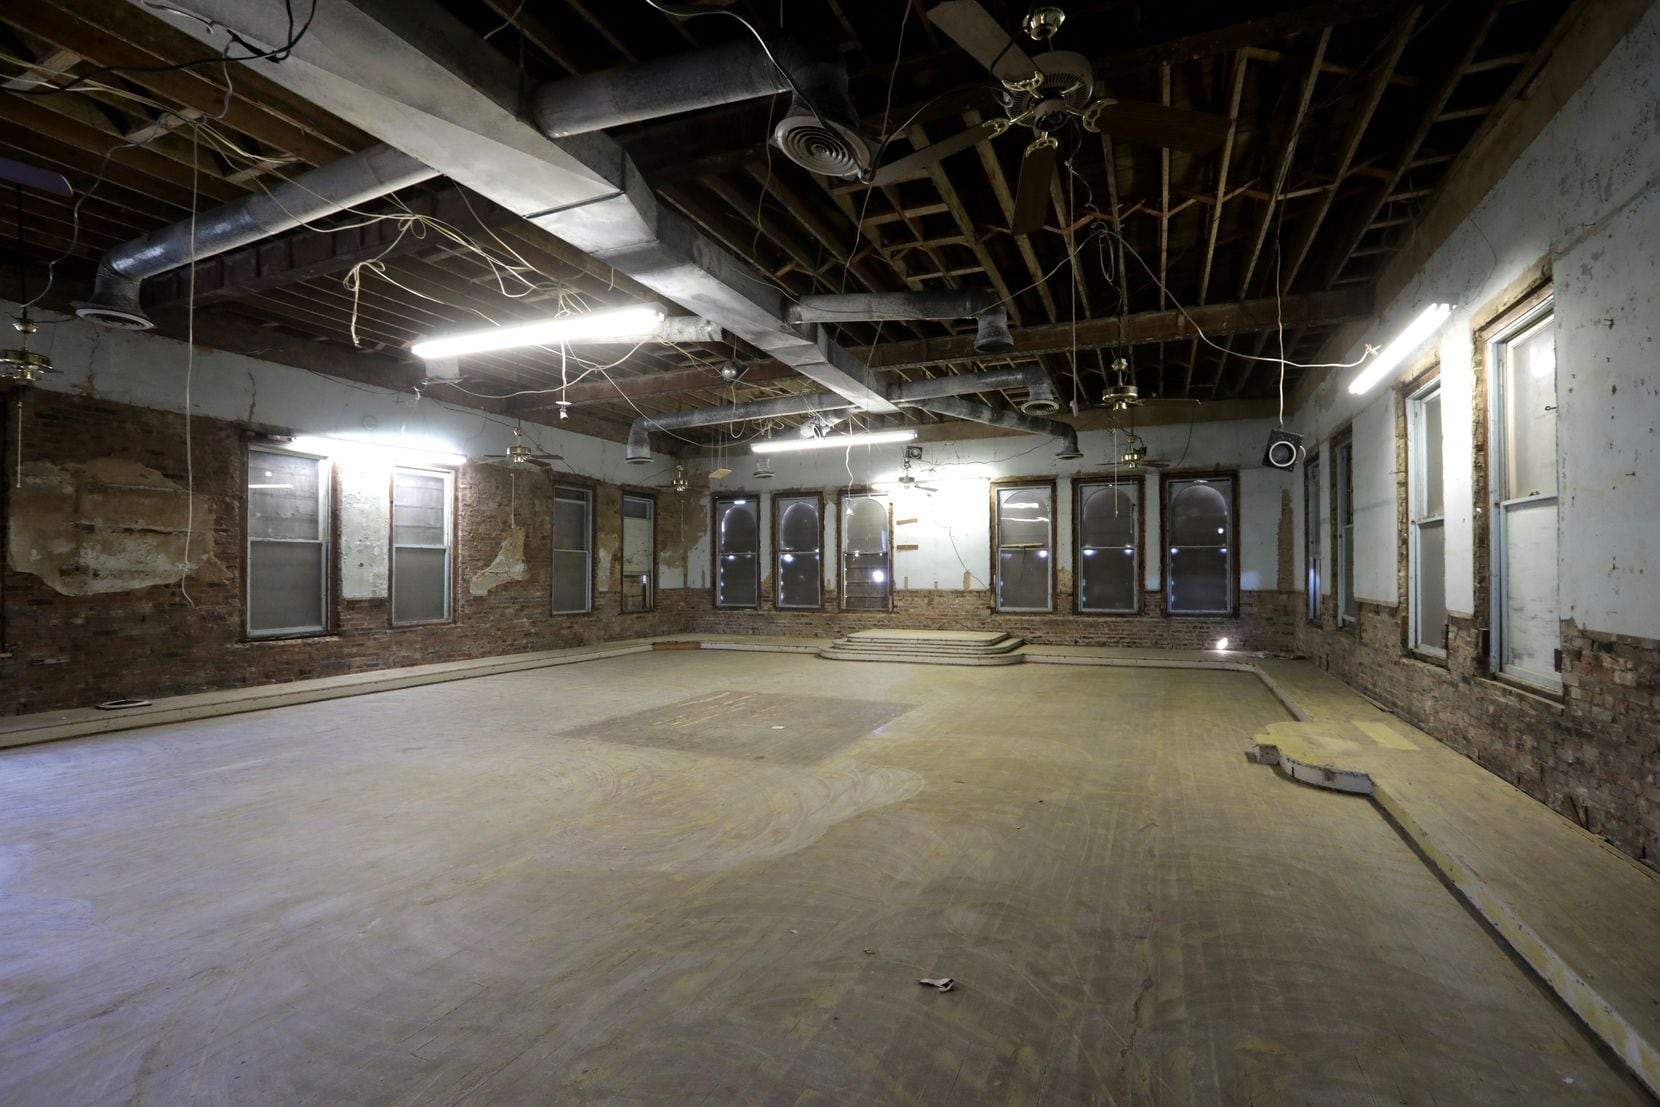 The third floor of the historic Masonic Lodge in downtown McKinney will be turned into a bar with live music.